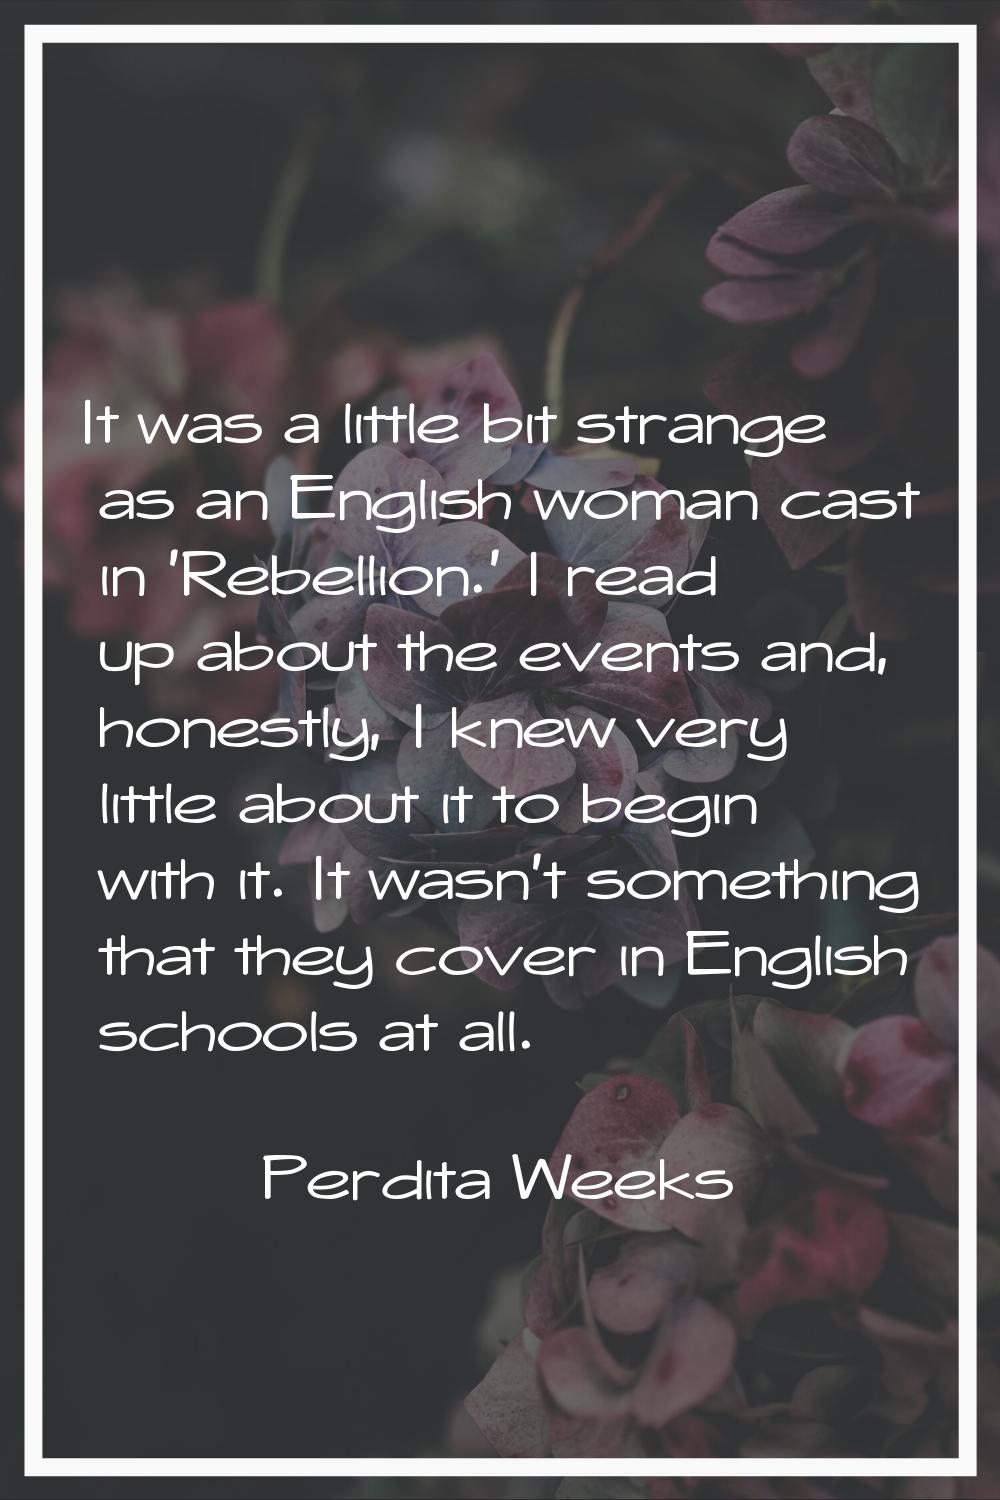 It was a little bit strange as an English woman cast in 'Rebellion.' I read up about the events and